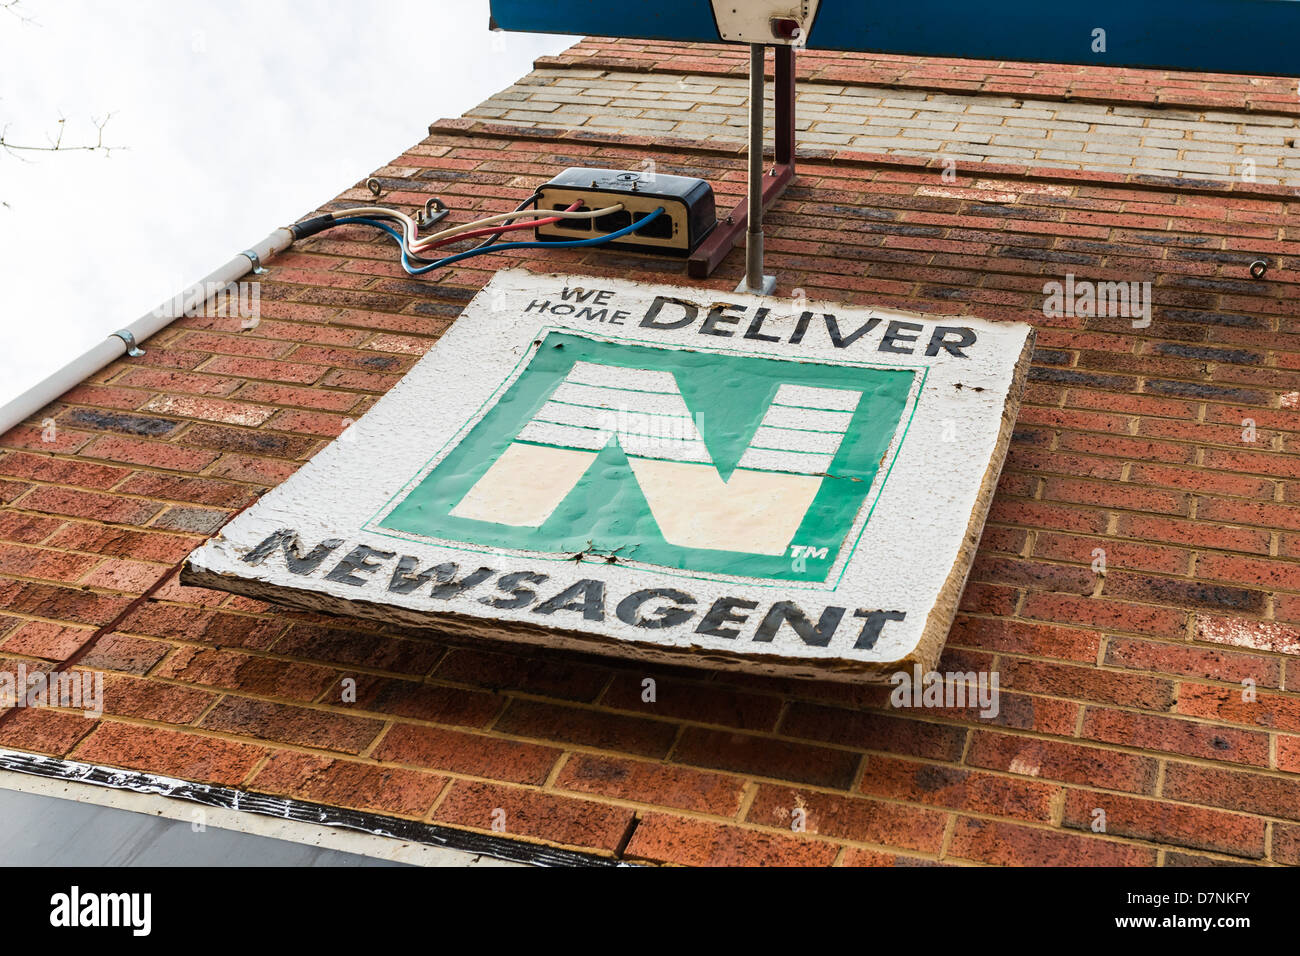 Dilapidated newsagent sign advertising home delivery. Conceptual image suggesting changing media  to non-paper alternatives Stock Photo